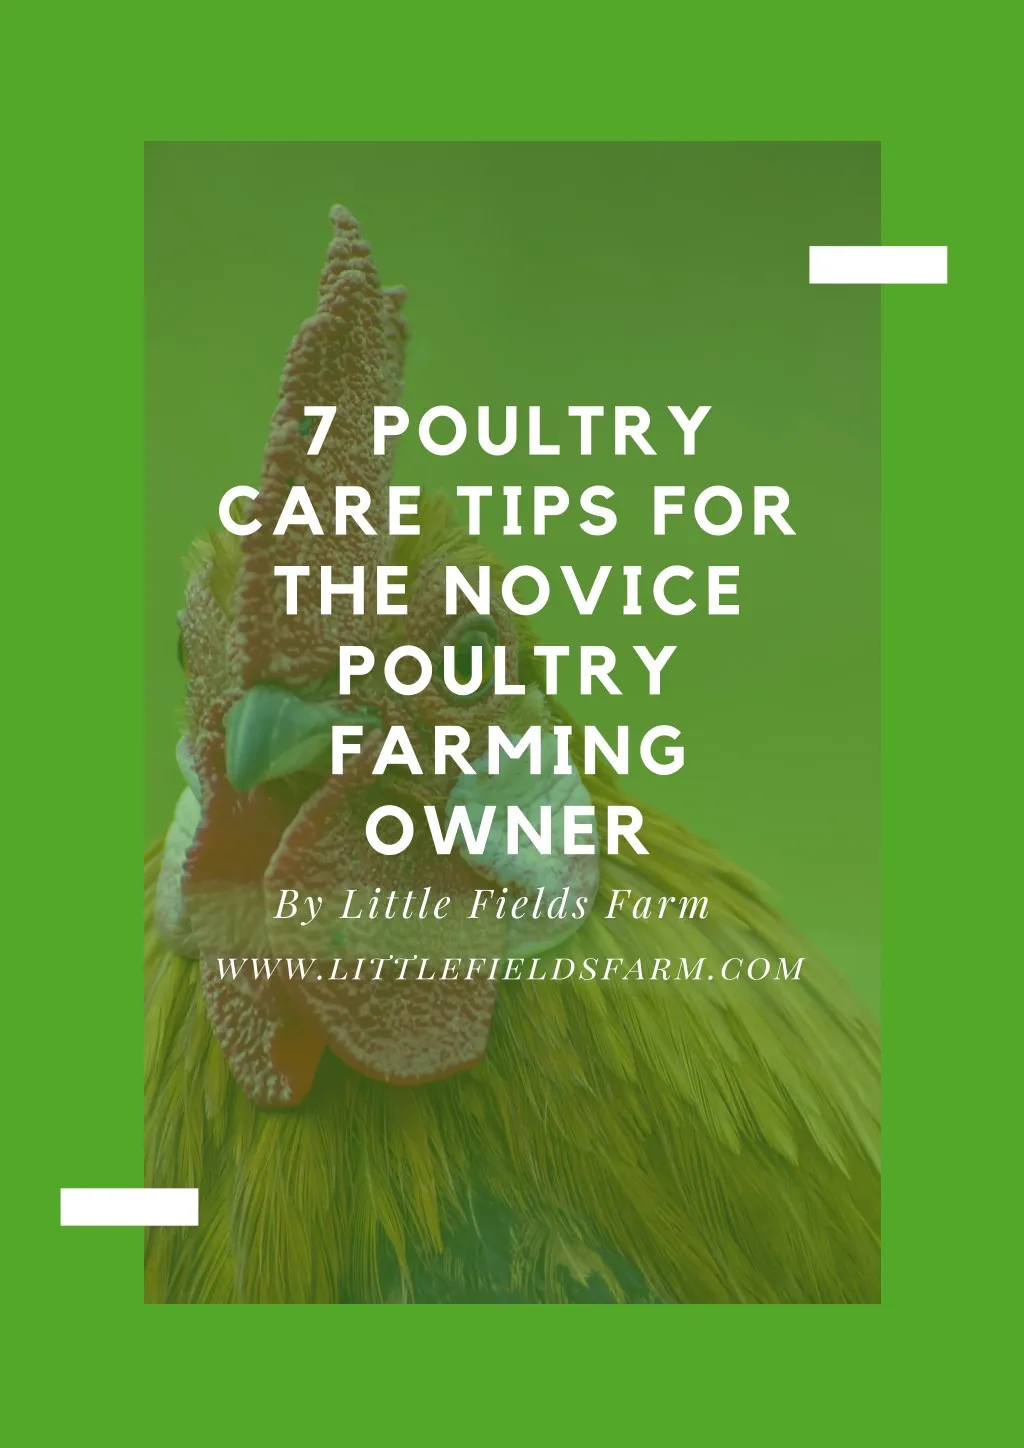 7 poultry care tips for the novice poultry